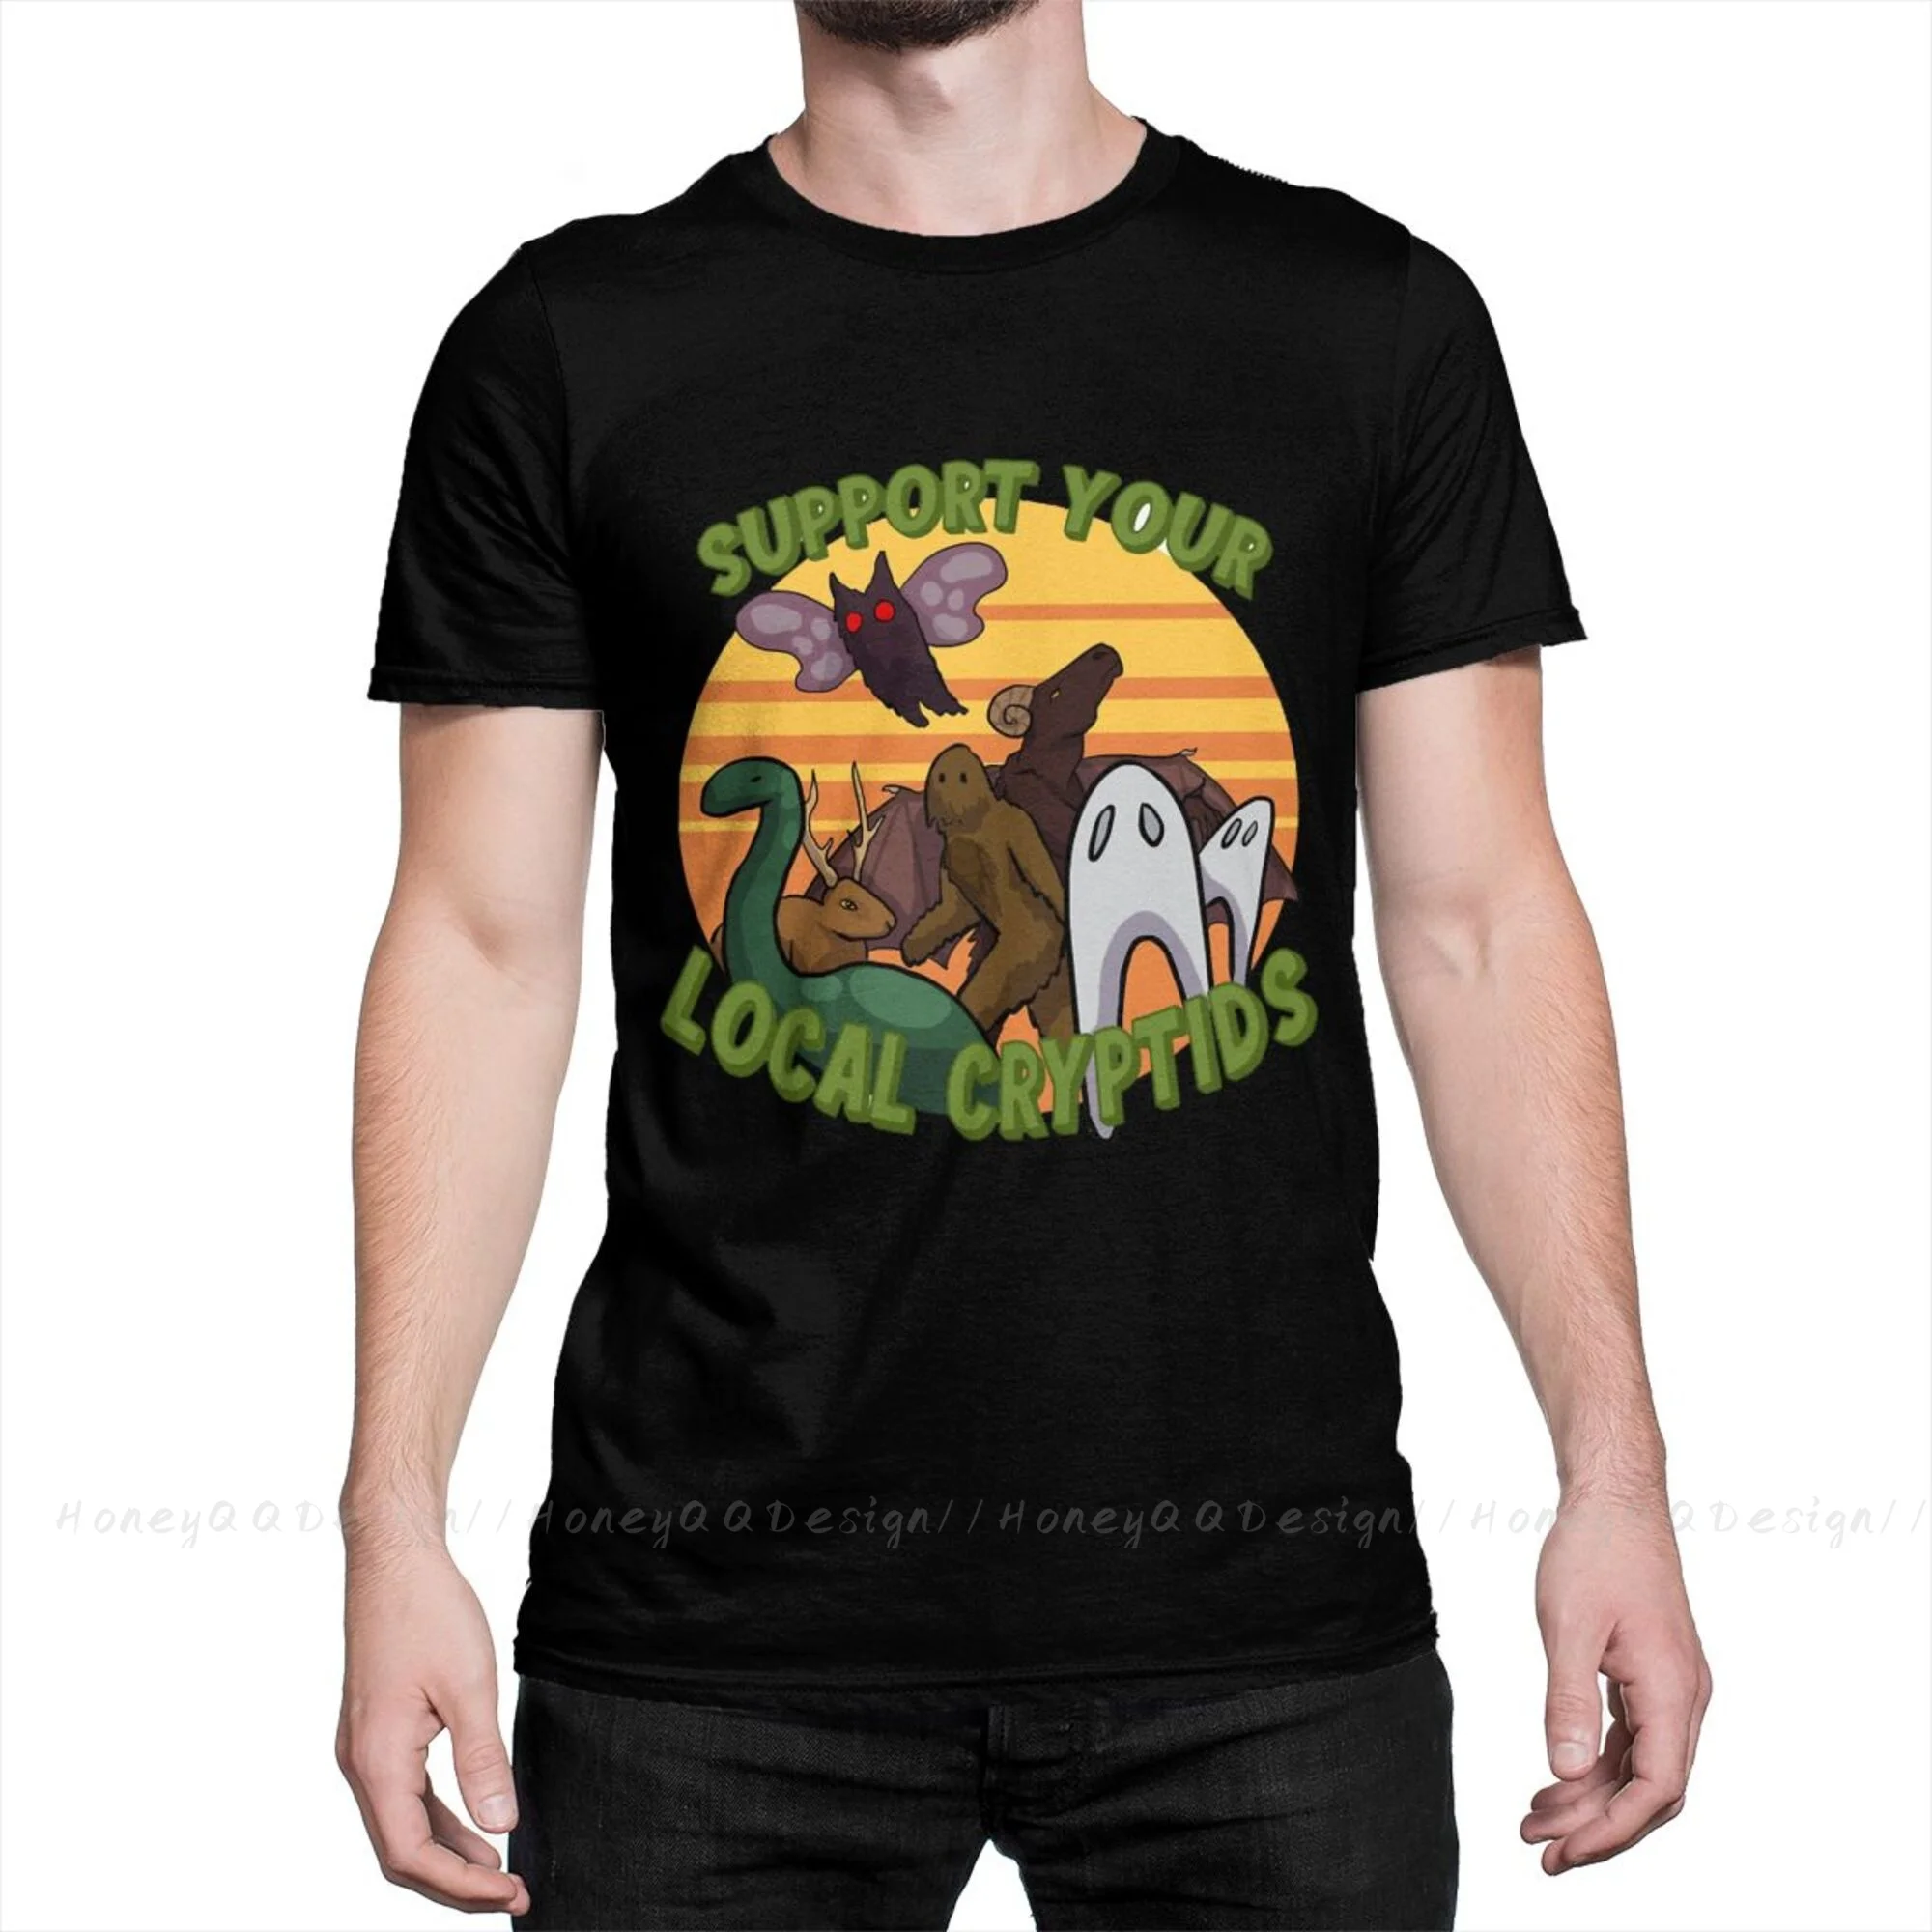 Support Your Local Cryptids Fashion Shirt Design Sasquatch Cotton Shirts Men T-Shirt Oversize For Adult Tees